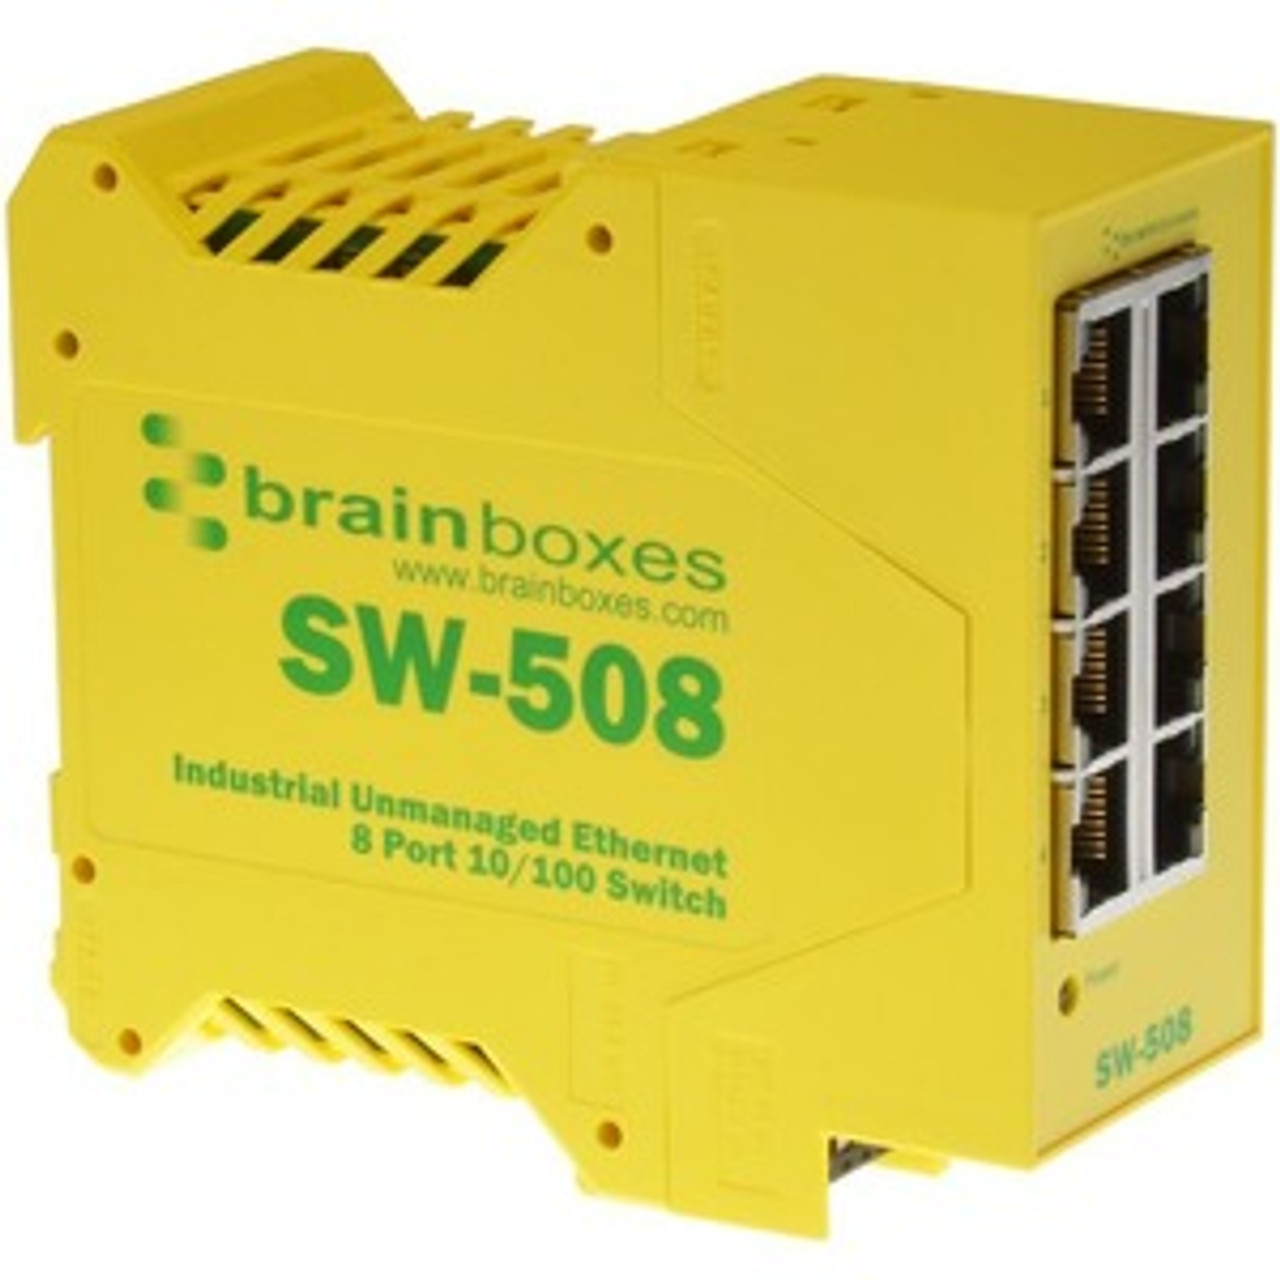 SW-508-X50M Brainboxes Industrial Ethernet 8 Port Switch DIN Rail Mountable - 8 Ports - 2 Layer Supported - Twisted Pair - DIN Rail Mountable - Lifetime